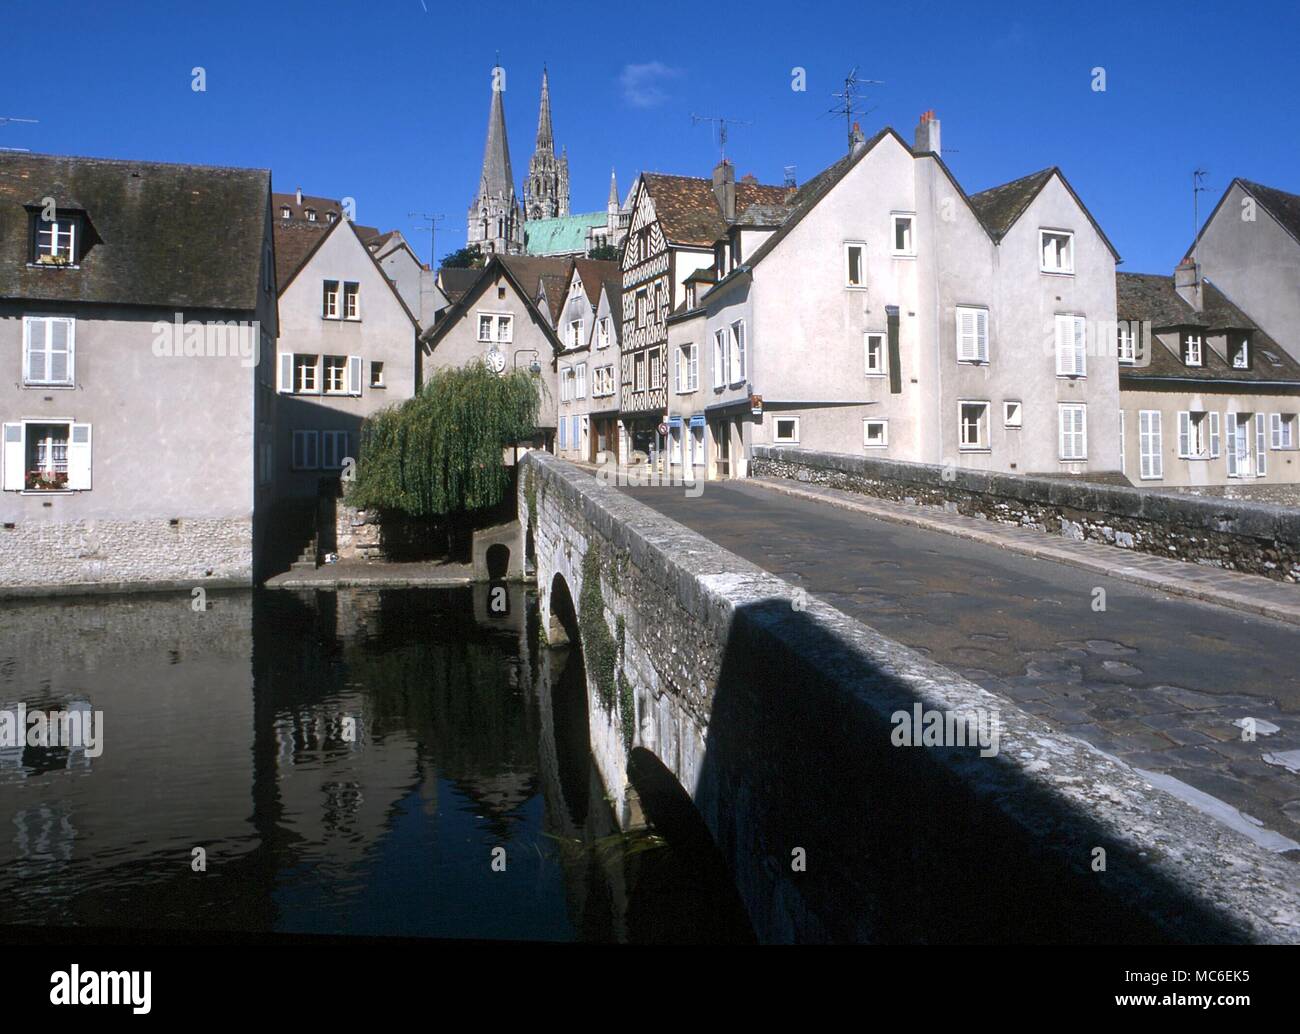 Chartres Cathedral The 12th century cathedral, seen from one of the old bridges Stock Photo